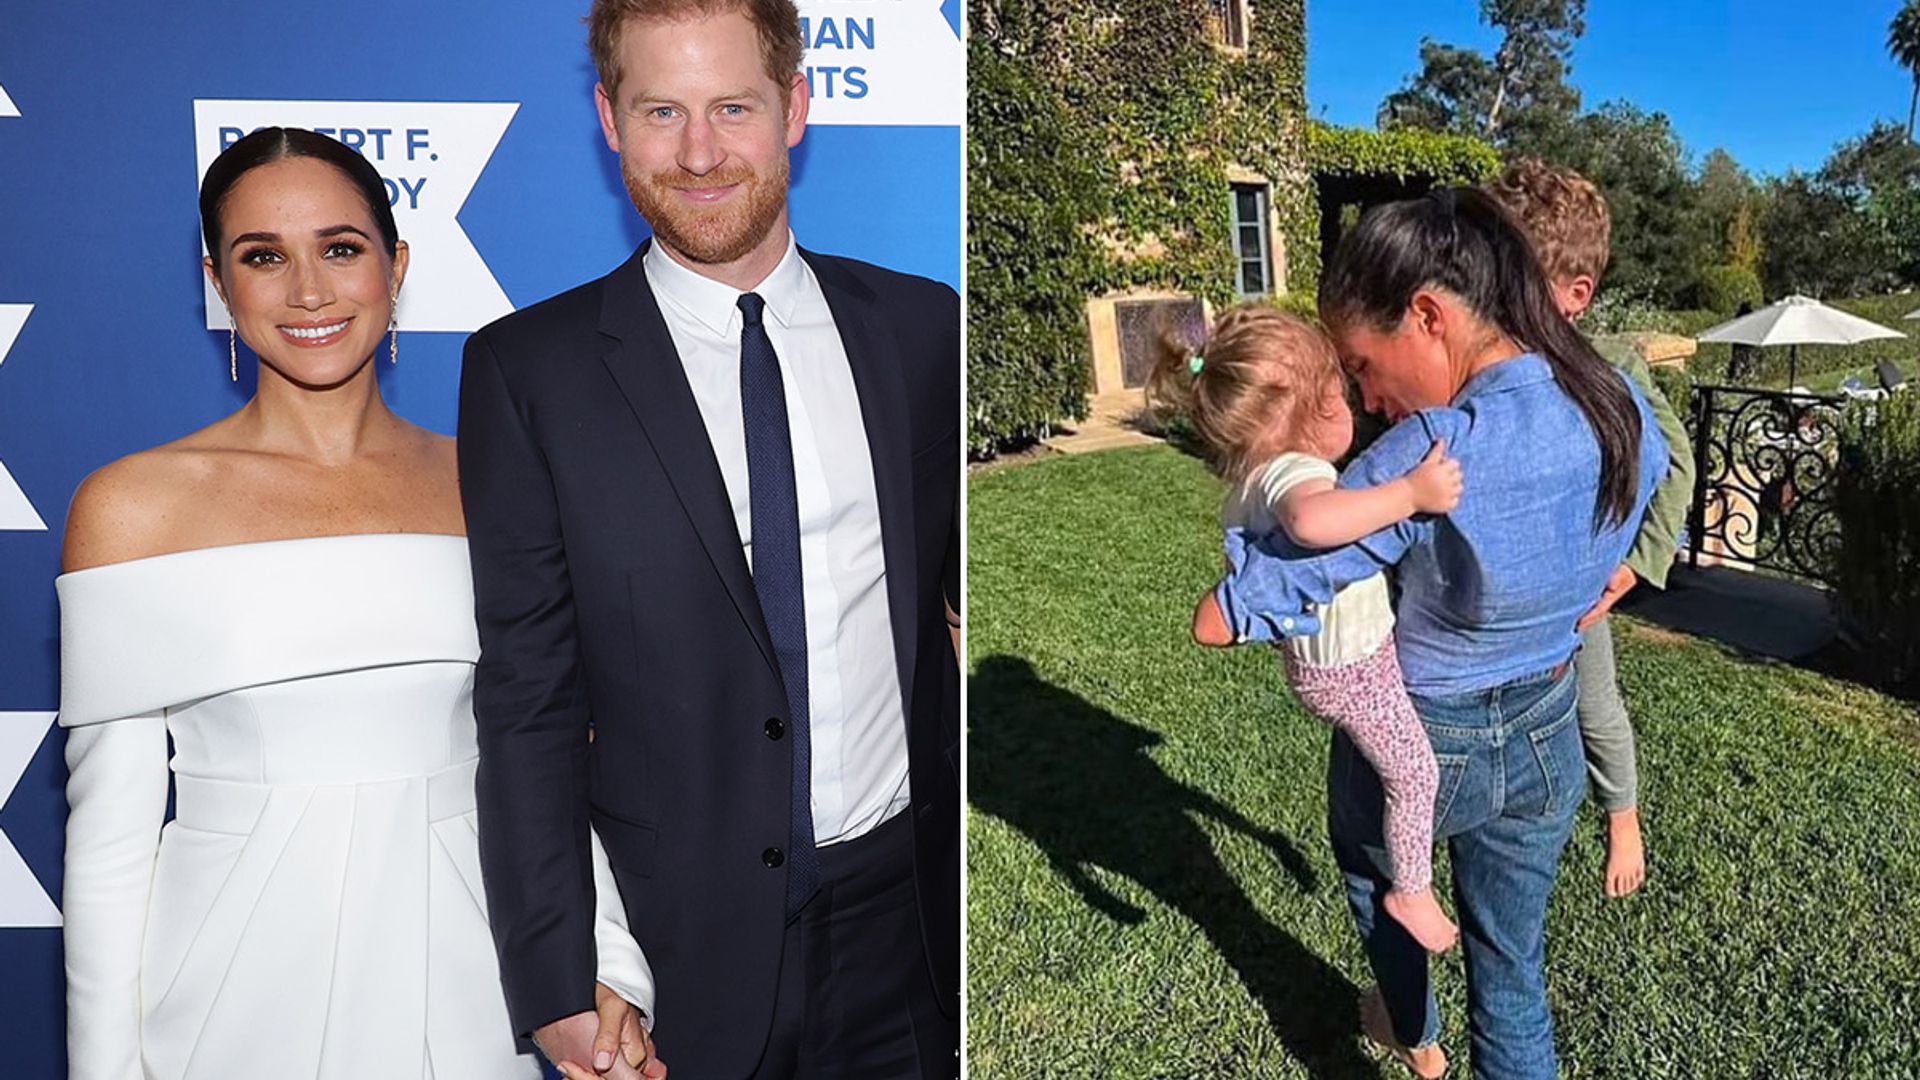 Prince Harry and Meghan Markle's kids Archie and Lilibet to finally